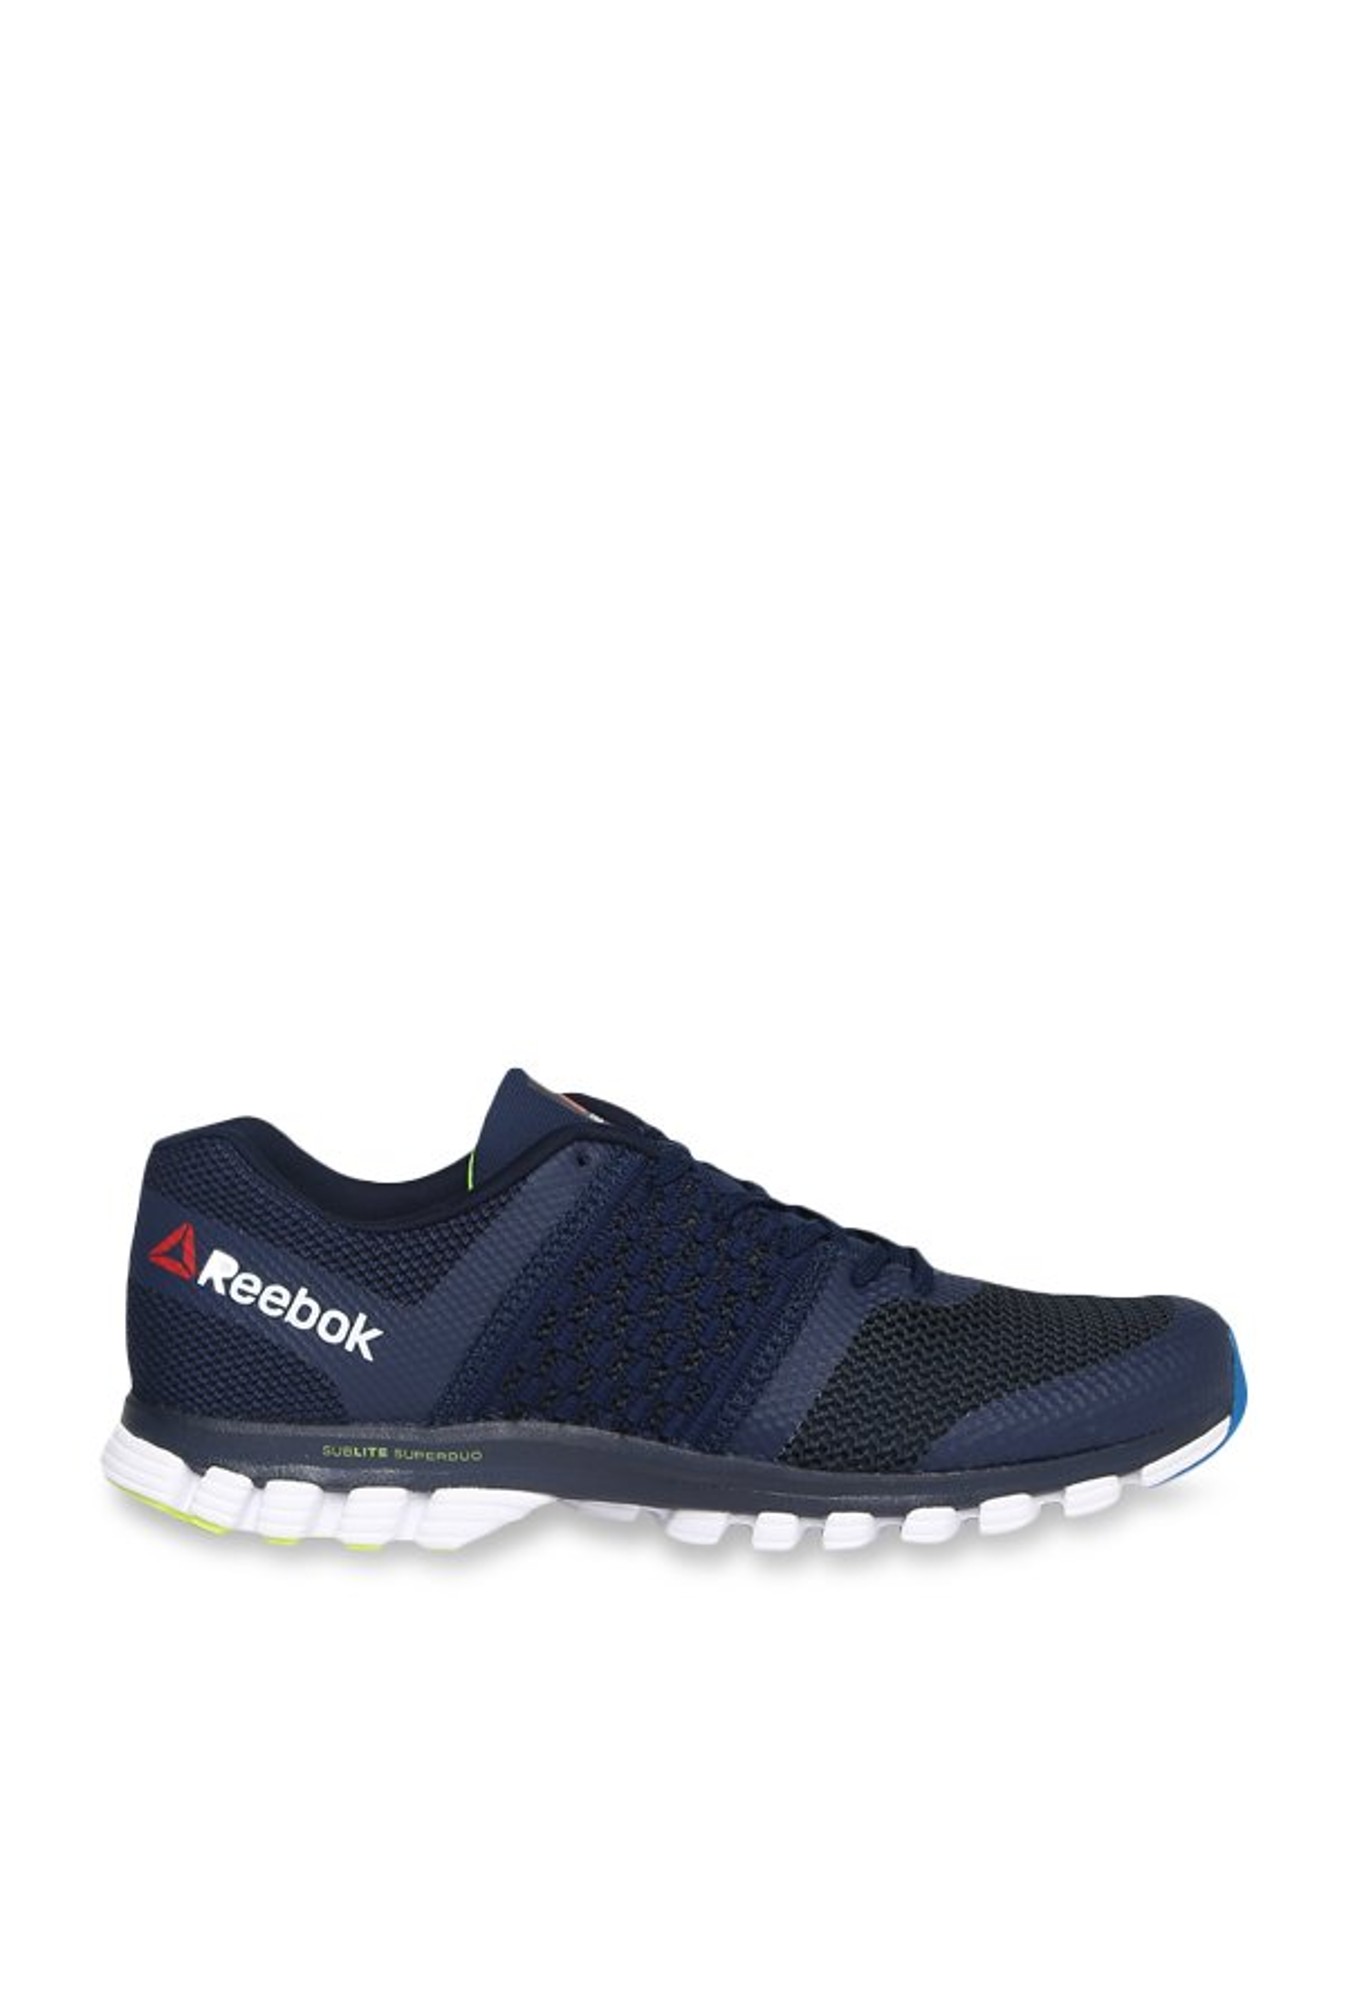 reebok sublite transition running shoes